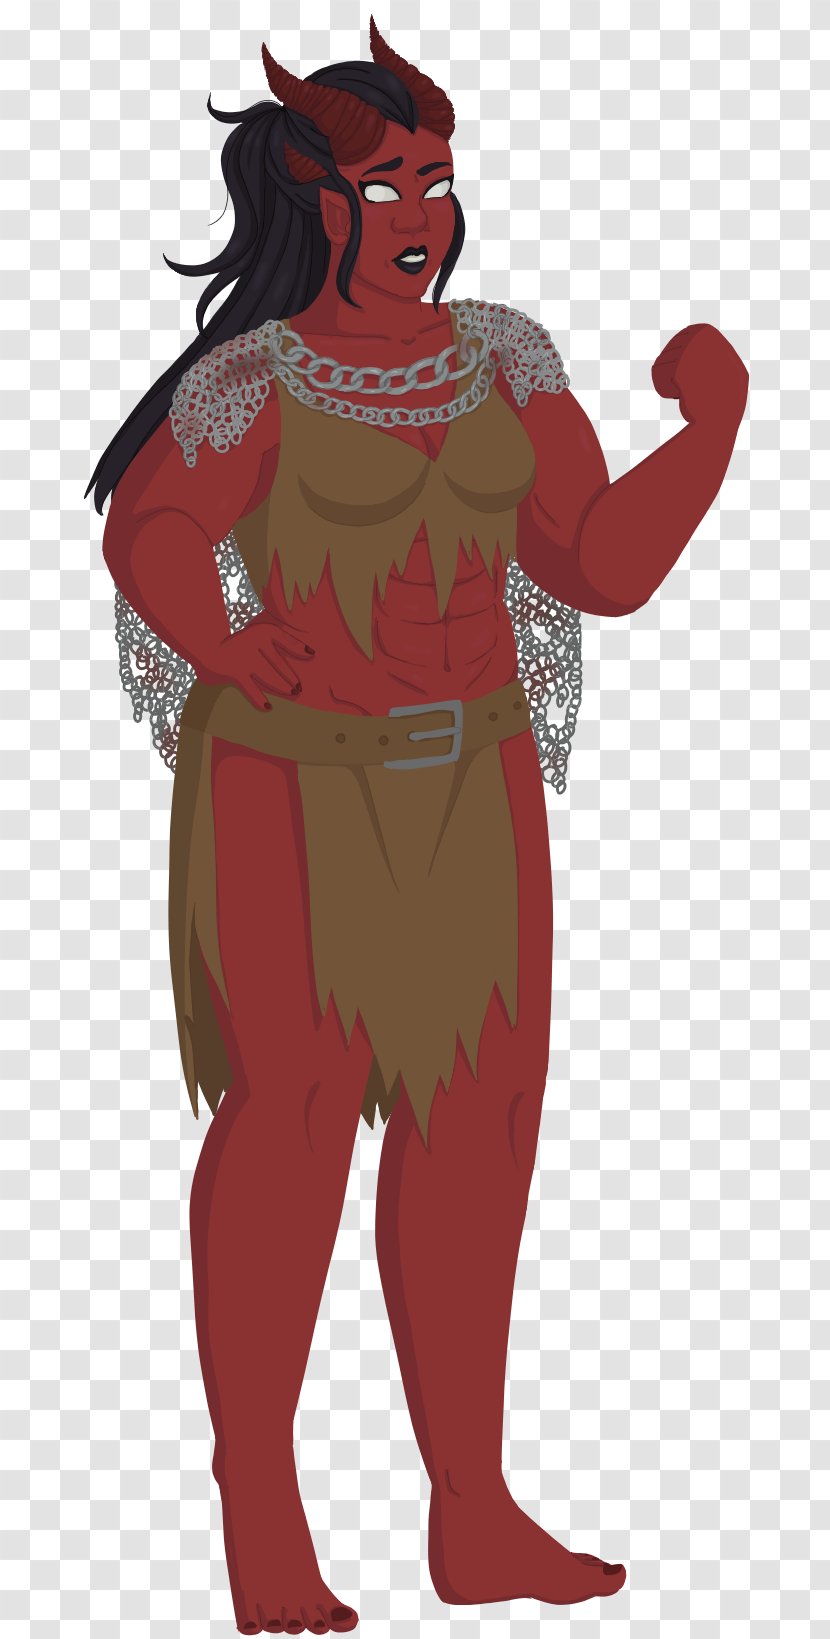 Dungeons & Dragons Tiefling Demon Barbarian - Mythical Creature Transparent PNG